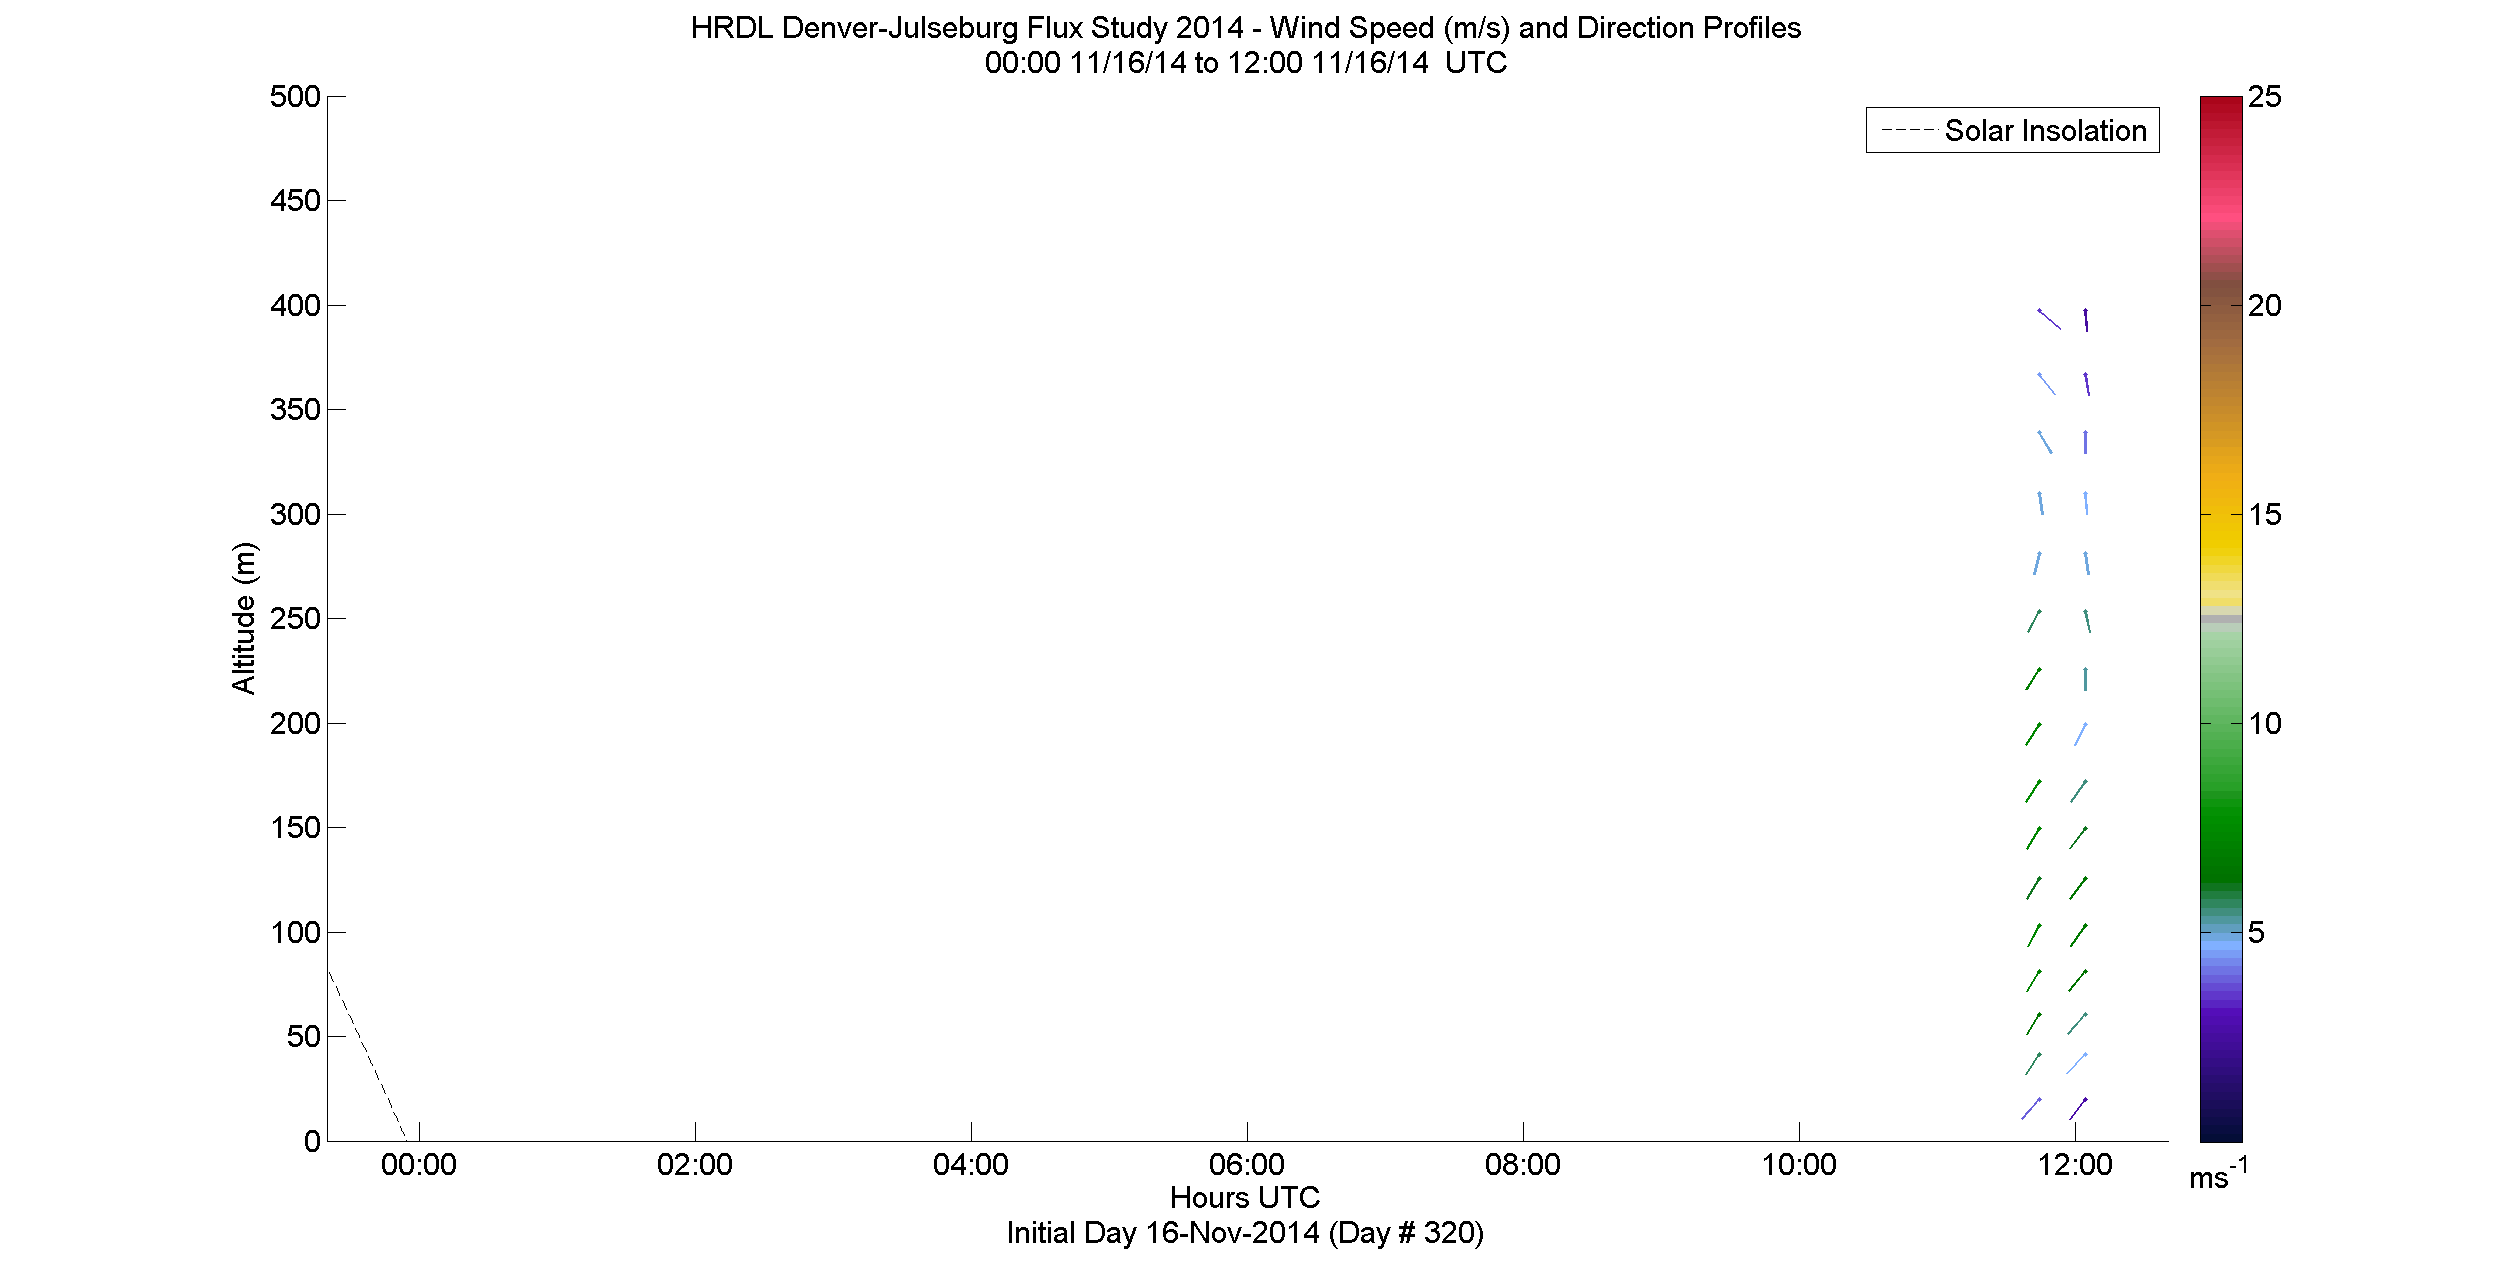 HRDL speed and direction profile - November 16 am